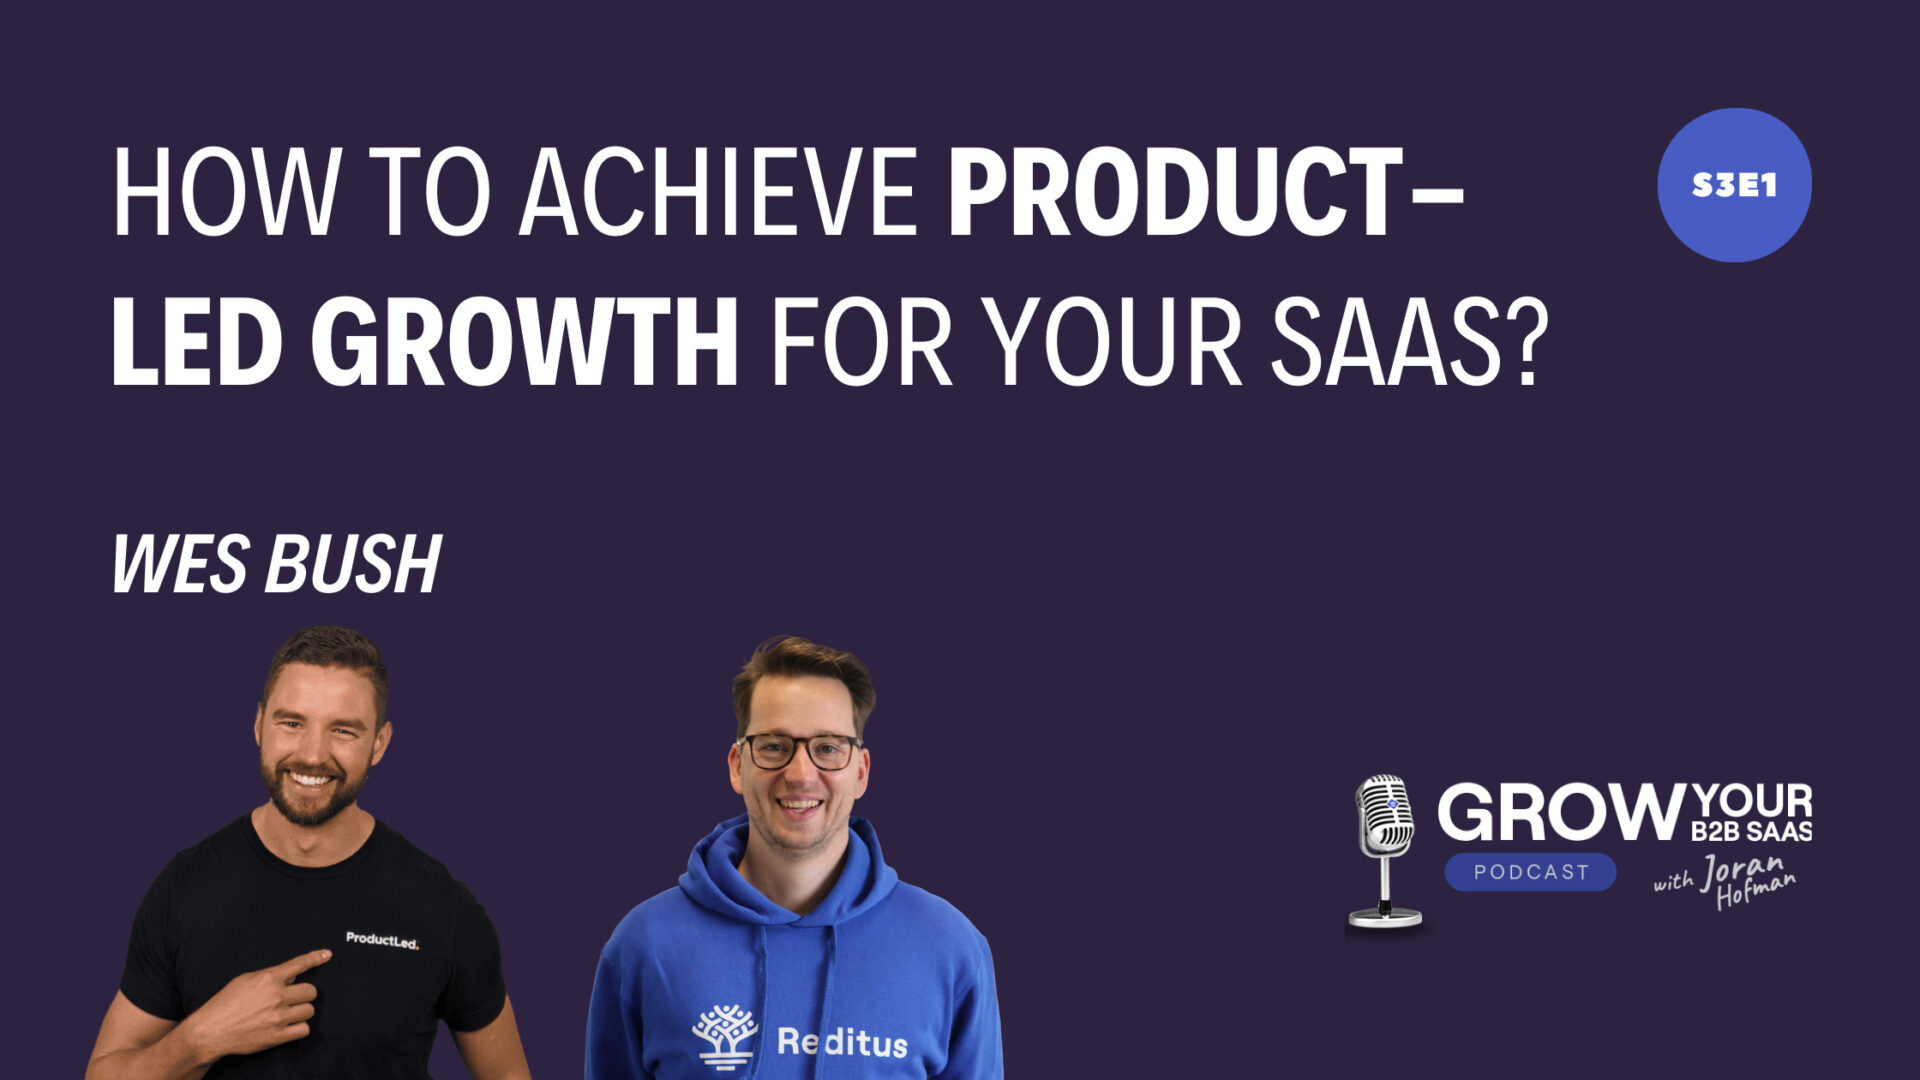 https://www.getreditus.com/podcast/s3e1-how-to-achieve-product-led-growth-for-your-saas-with-wes-bush/